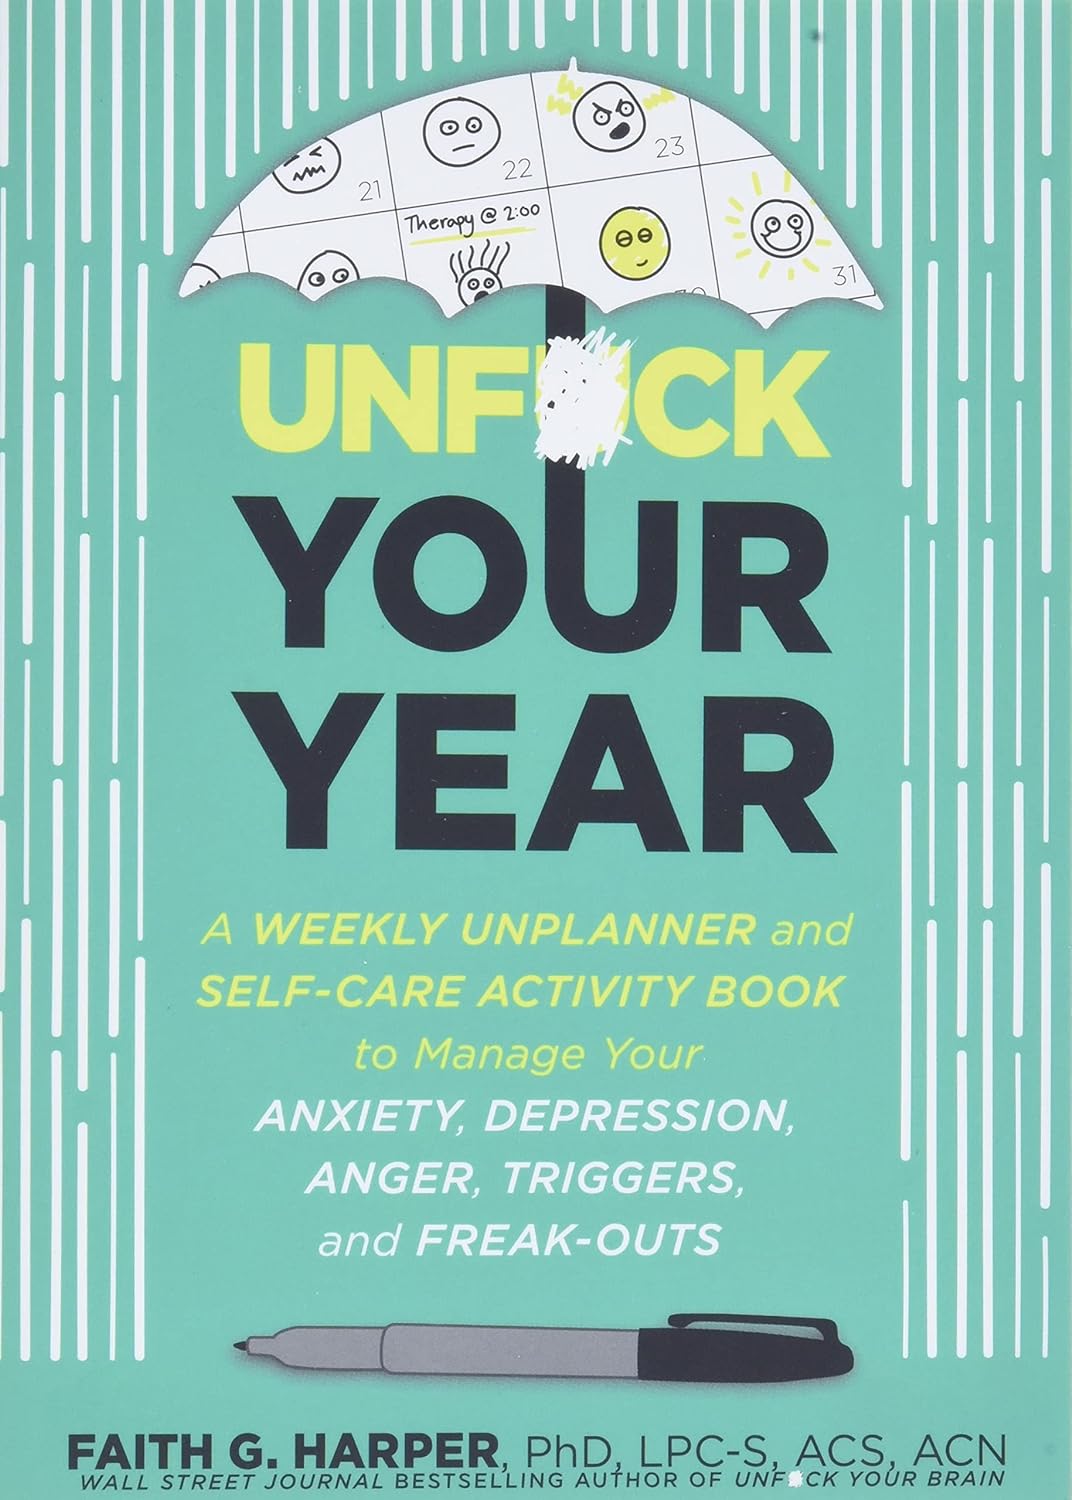 Unfuck Your Year: A Weekly Unplanner and Self-Care Activity Book to Manage Your Anxiety, Depression, Anger, Triggers, and Freak-Outs